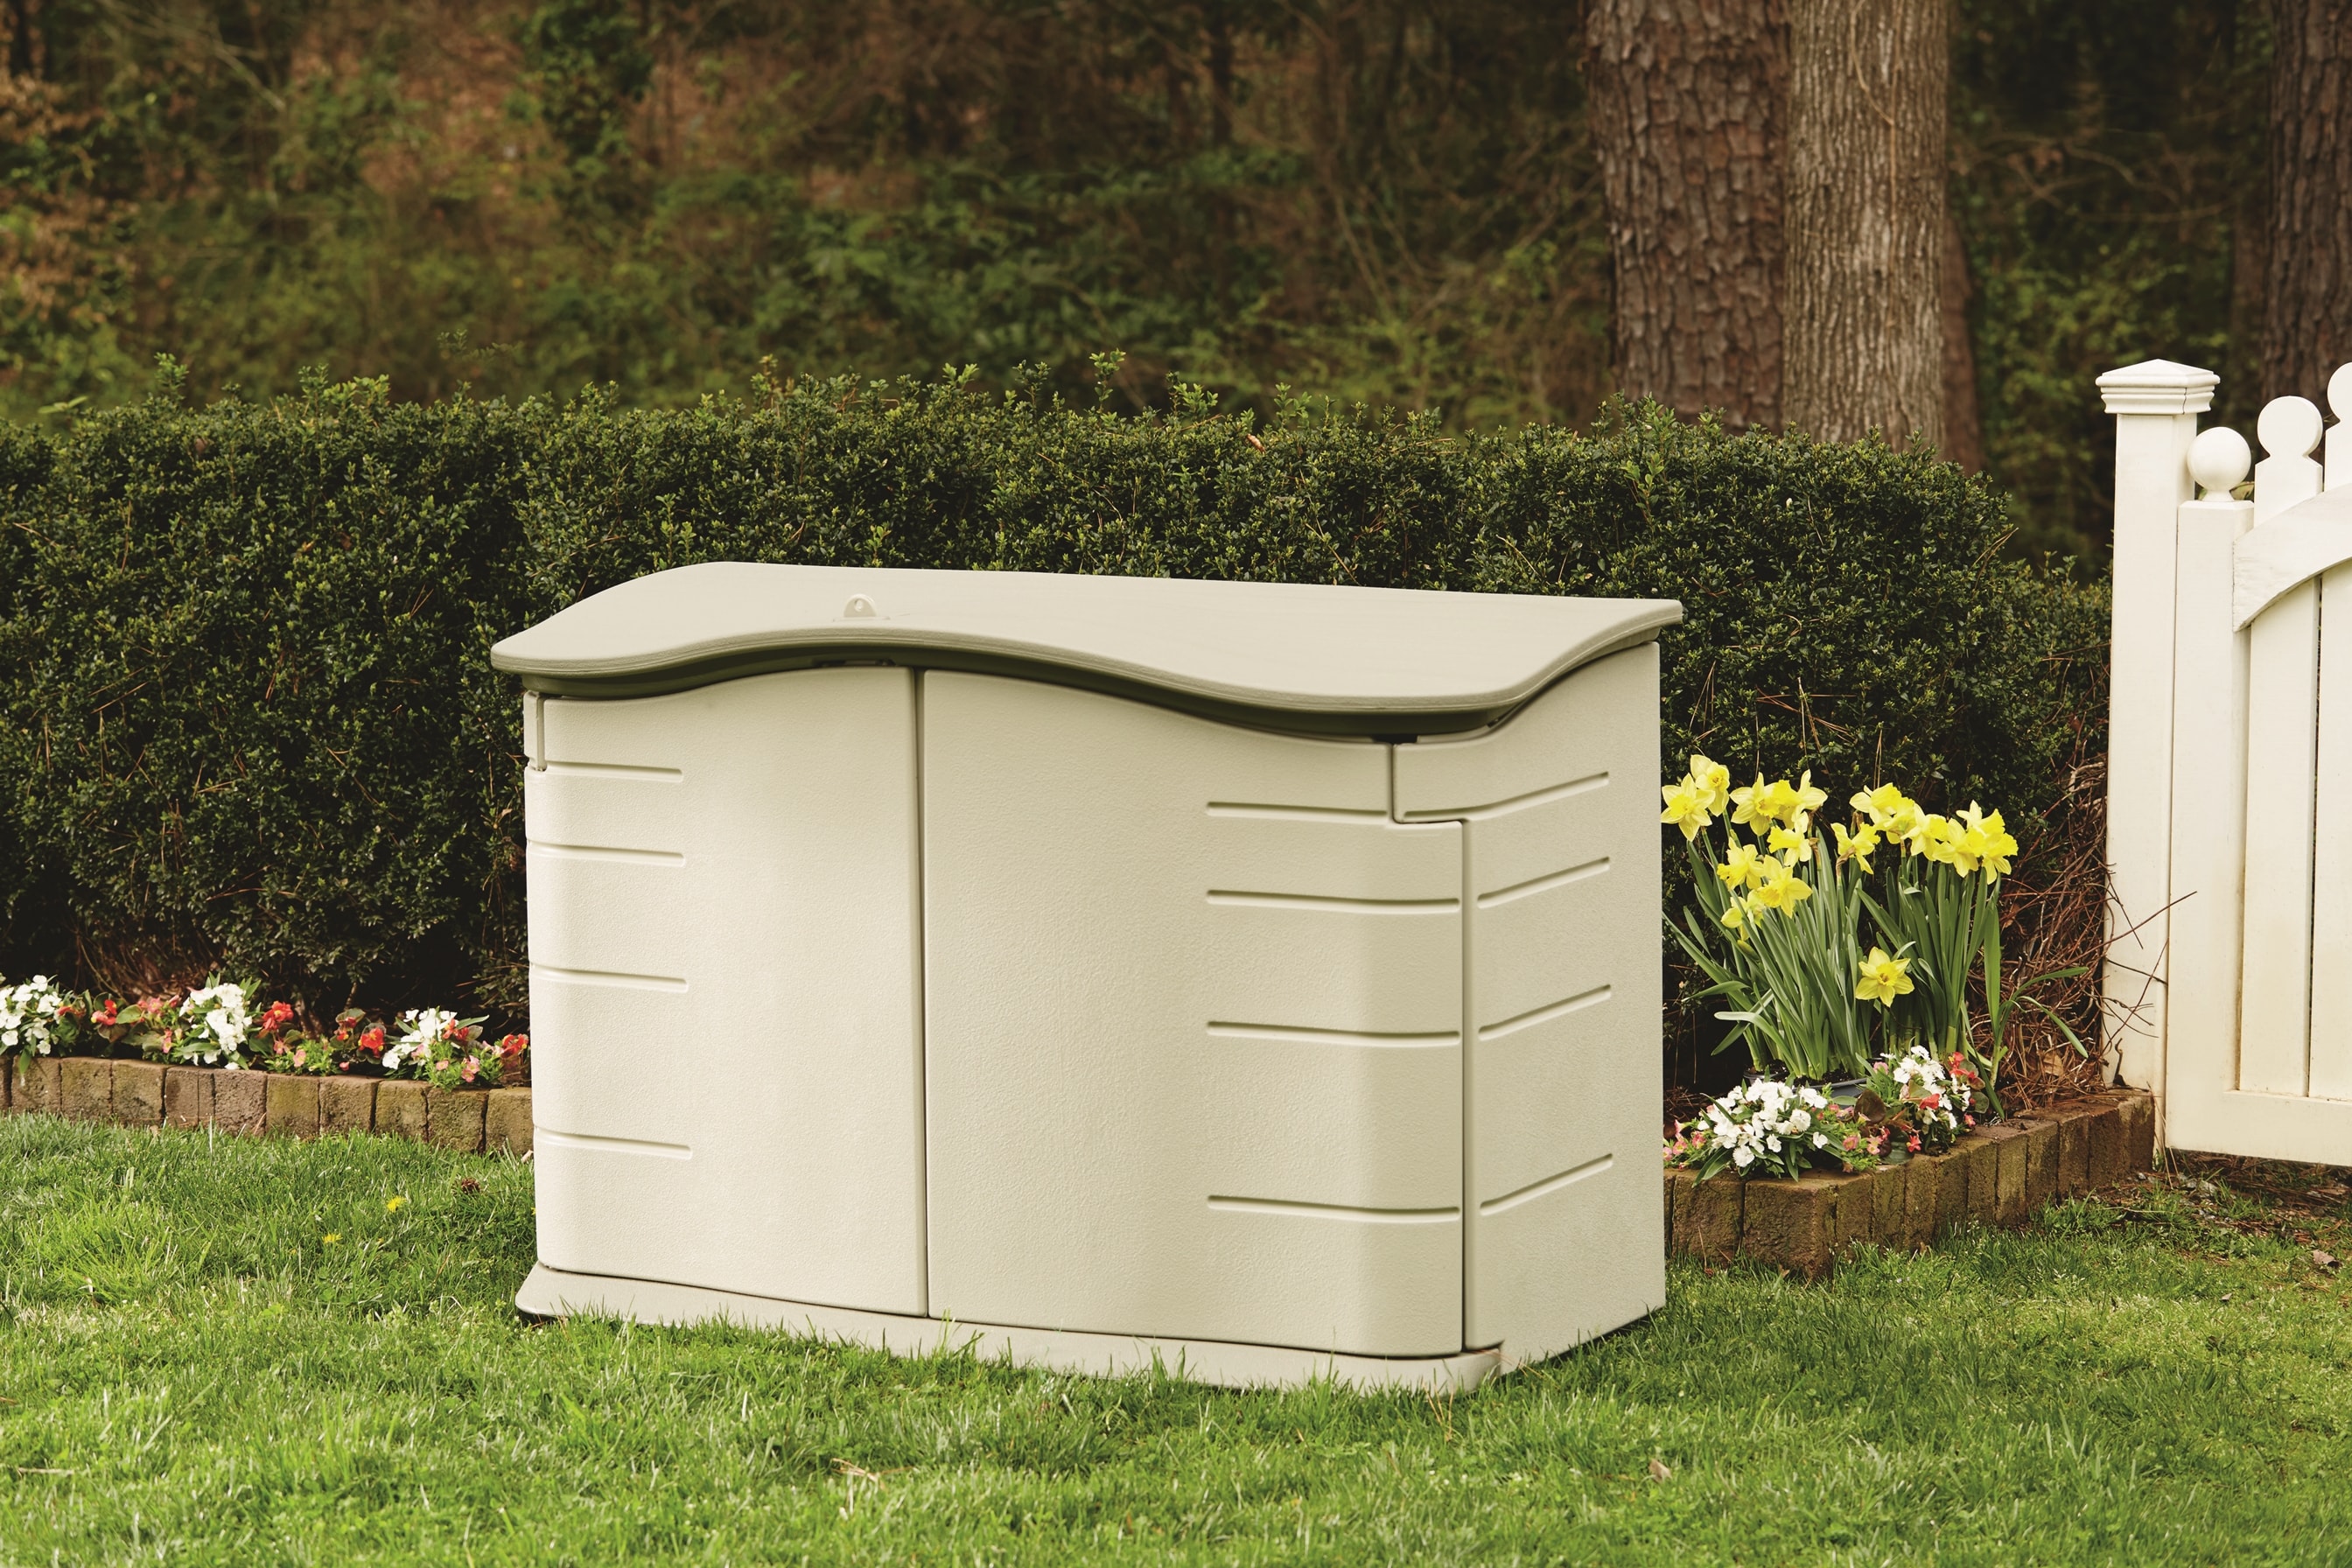 Rubbermaid Sandstone Resin Outdoor Storage Shed (Common: 56-in x 32-in;  Interior Dimensions: 47-in x 25-in) at